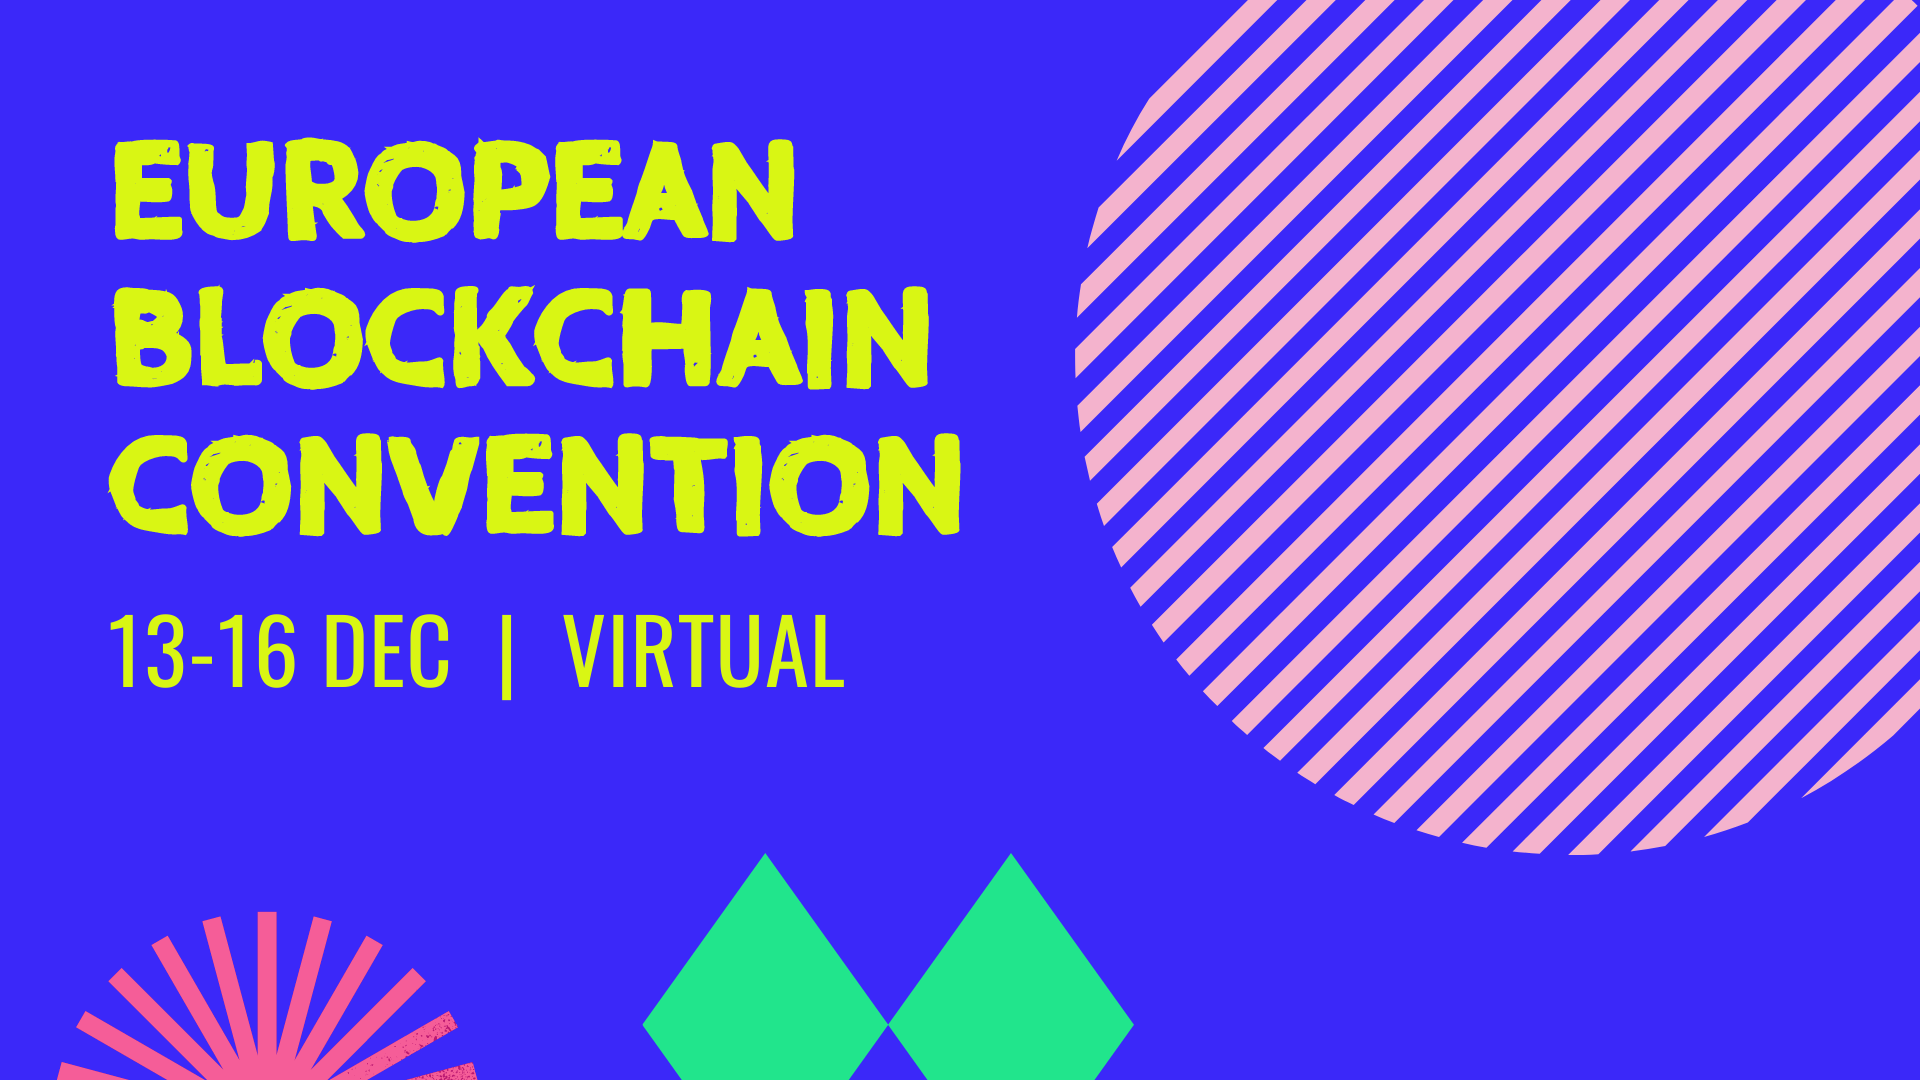 Article about The 6th European Blockchain Convention 